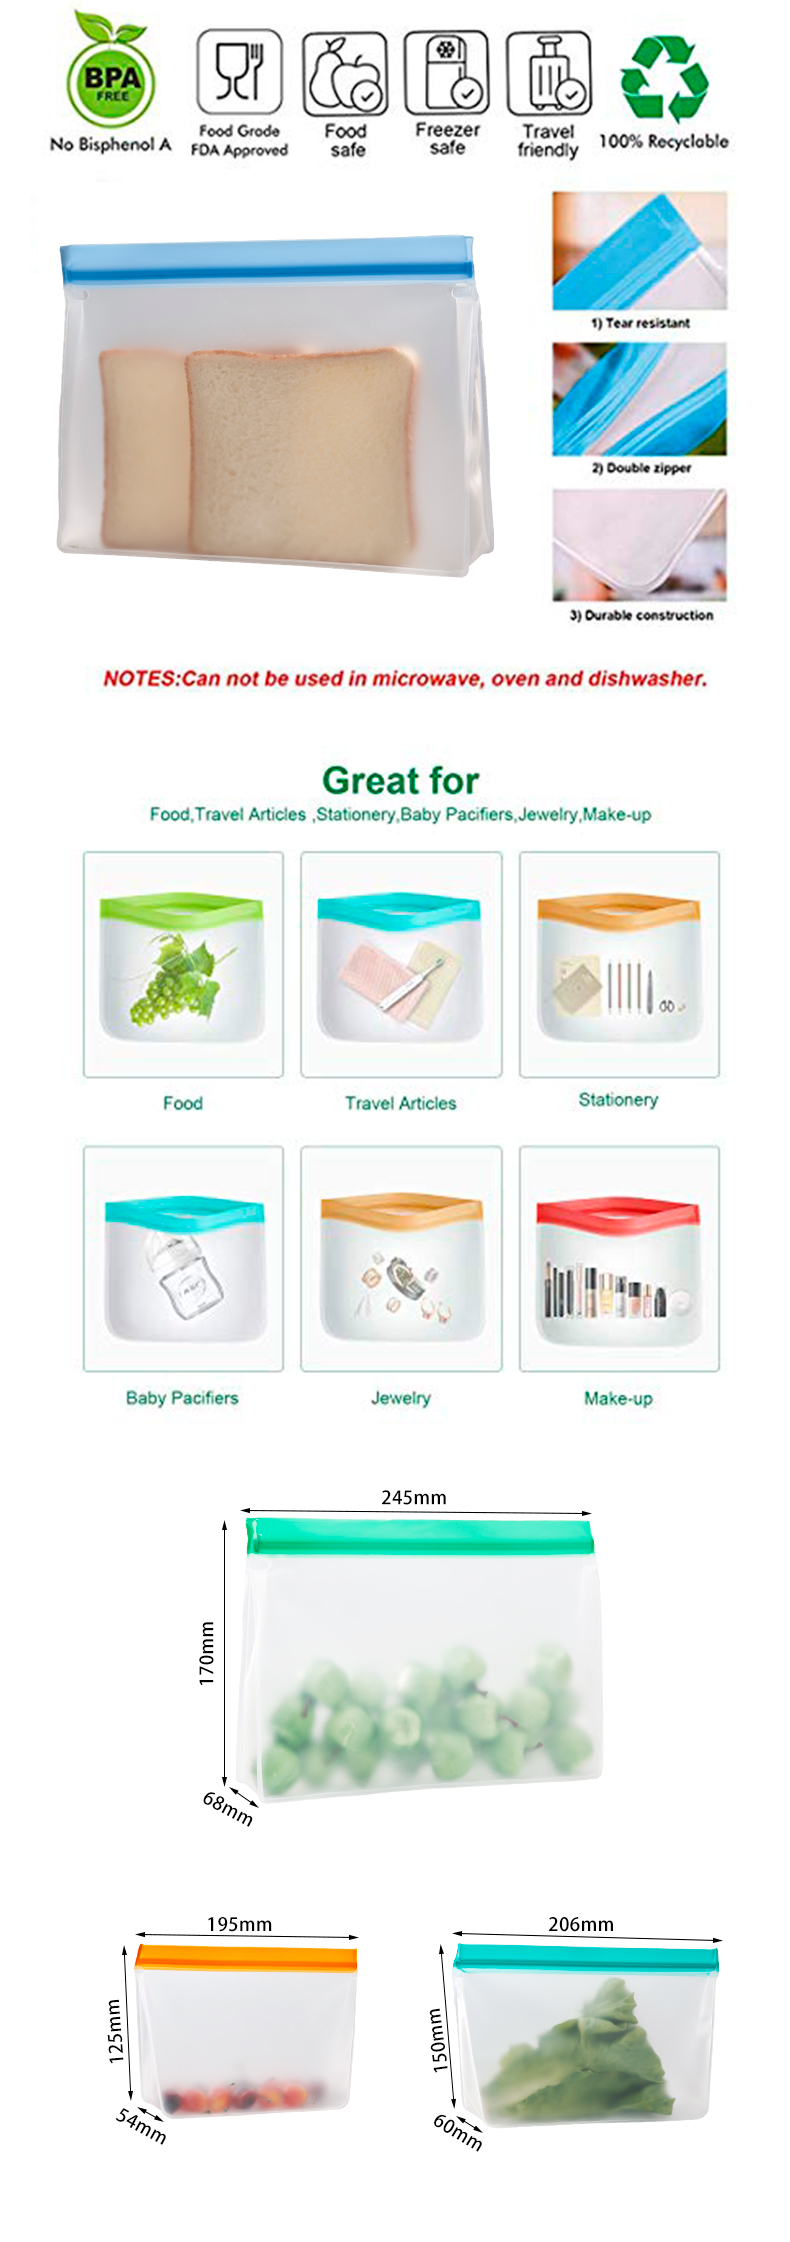 PEVA Grade FDA Approved Stand up Bags Reusable Sandwich Bags